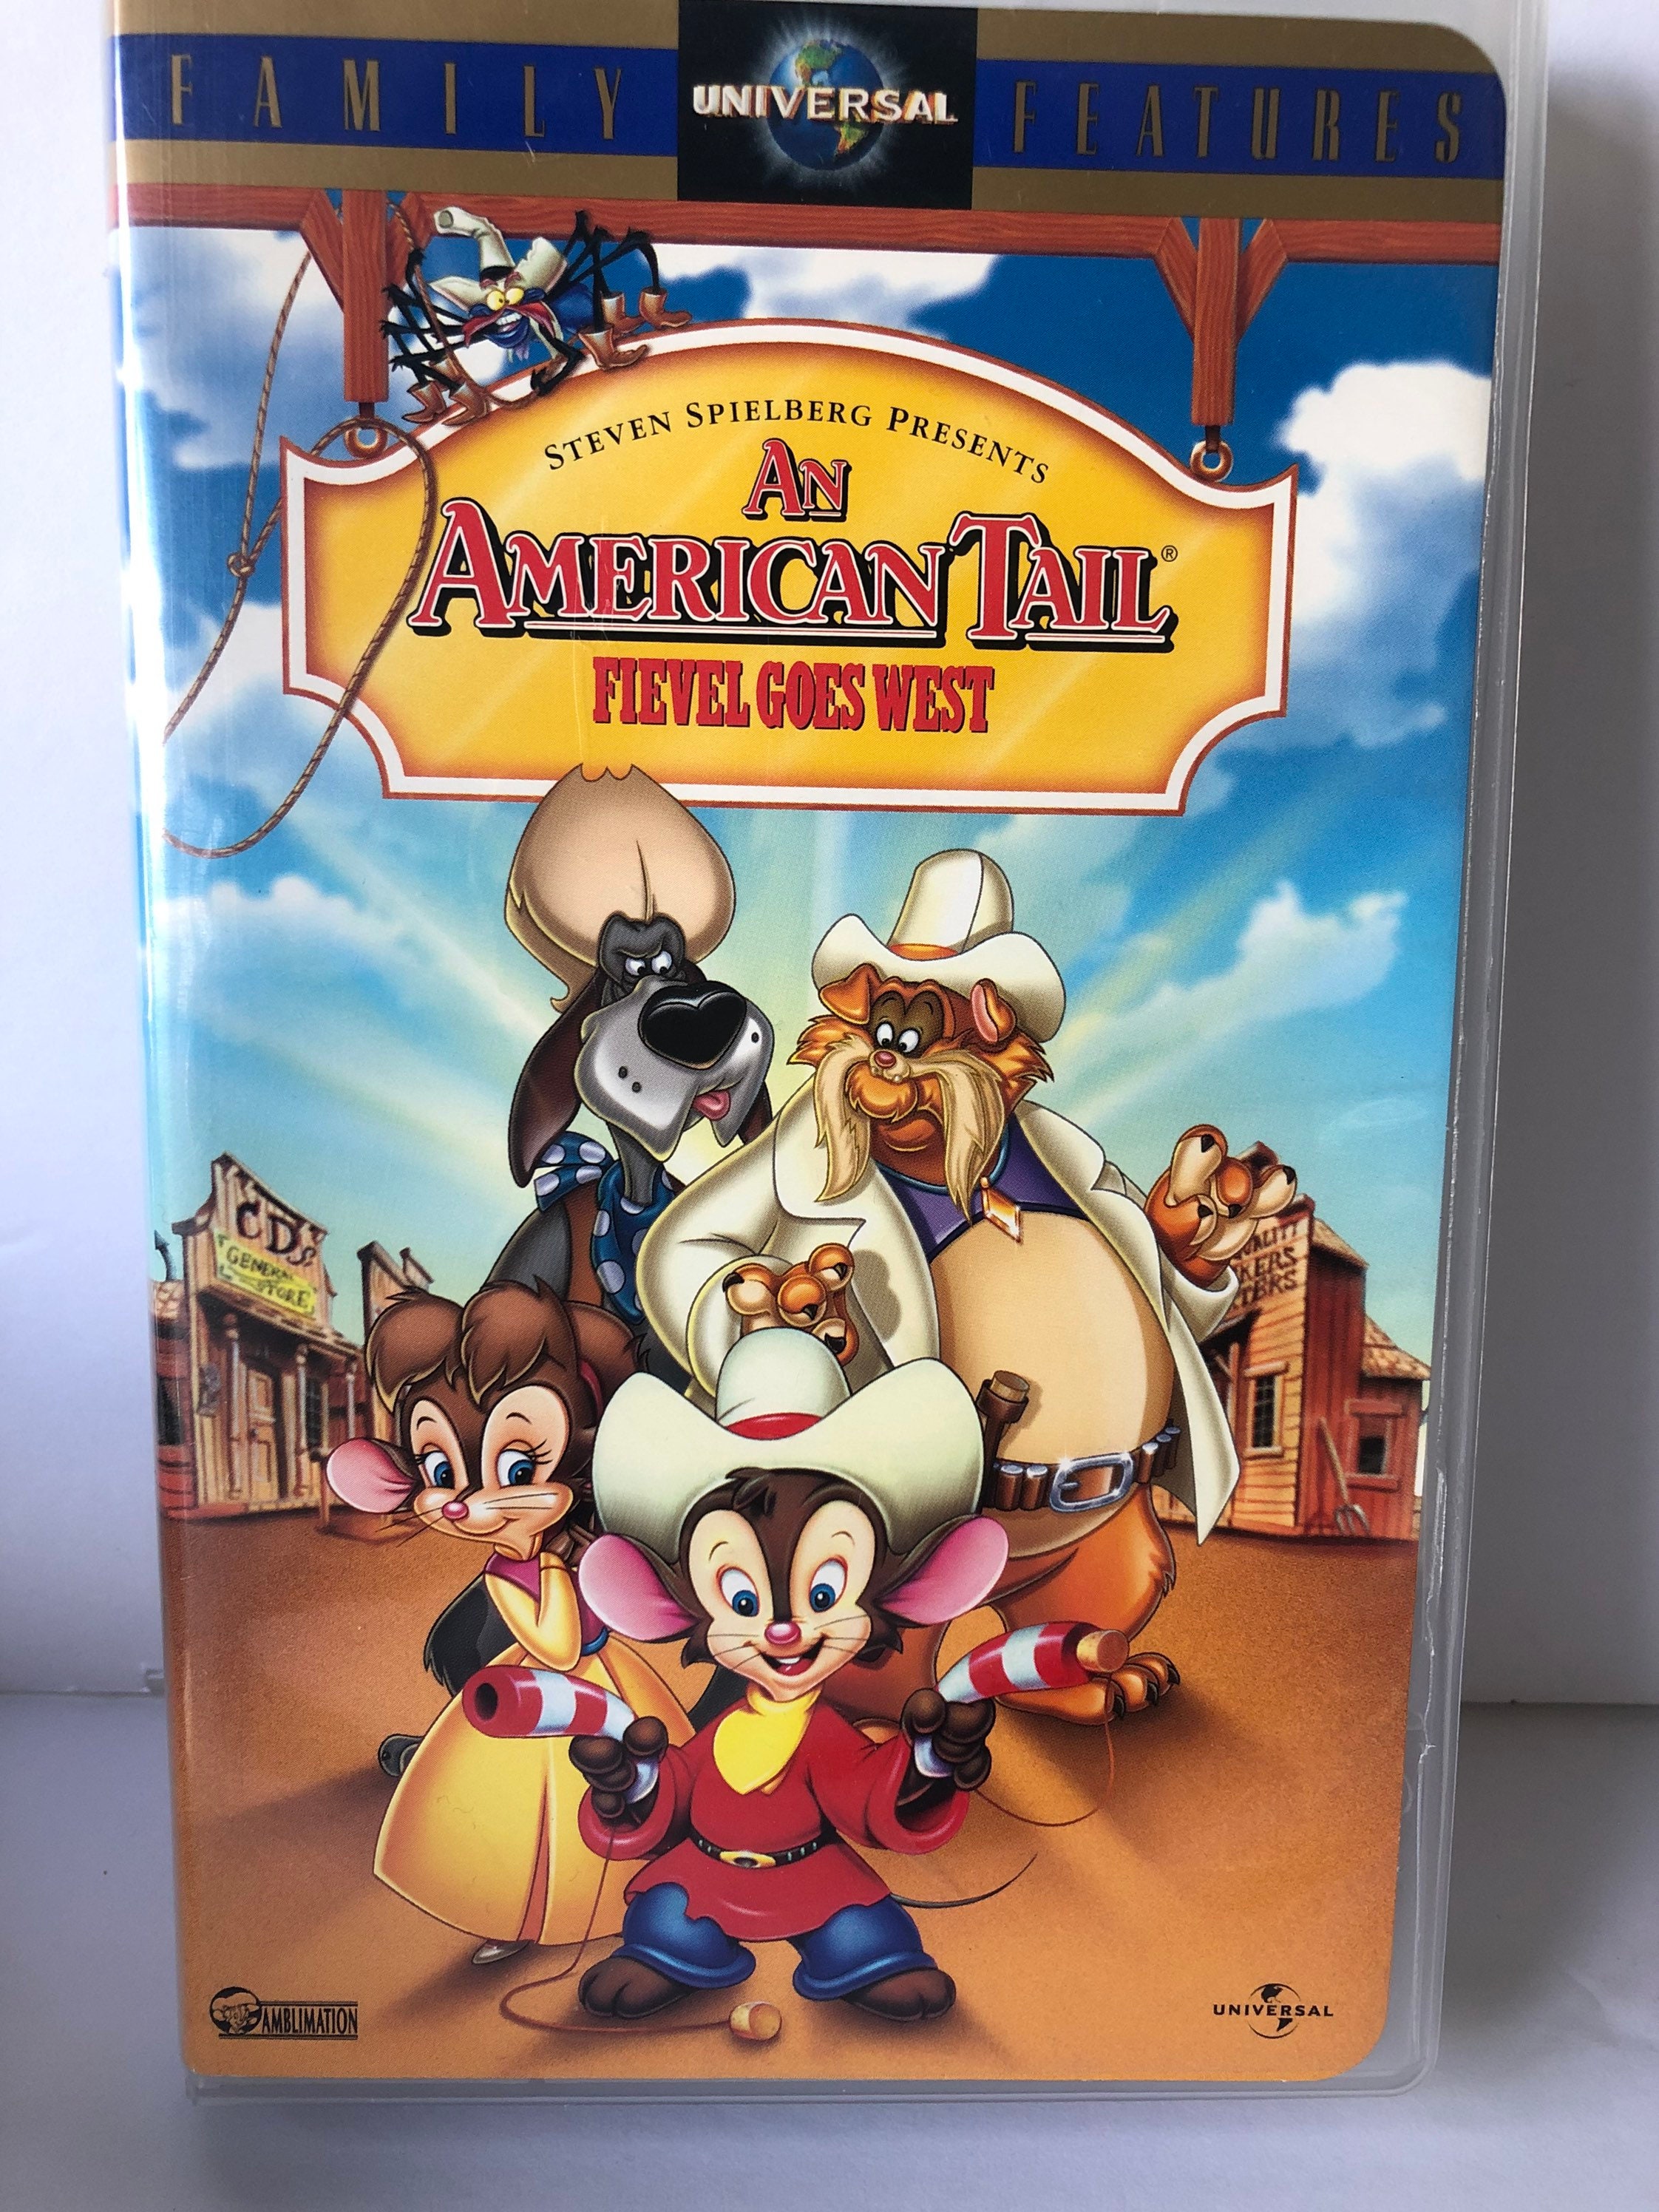 An American Tail Fievel Goes West Vhs Movie 1992 Fami - vrogue.co